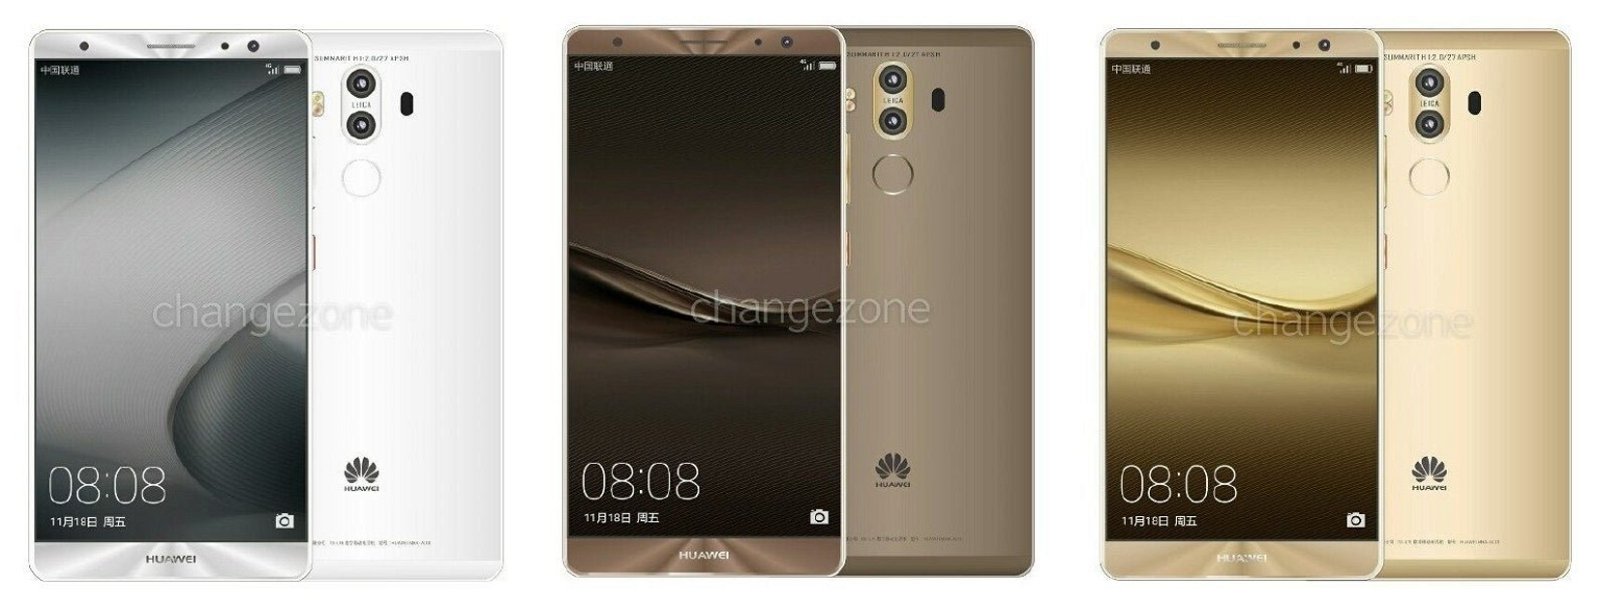 huawei-mate-9-colores